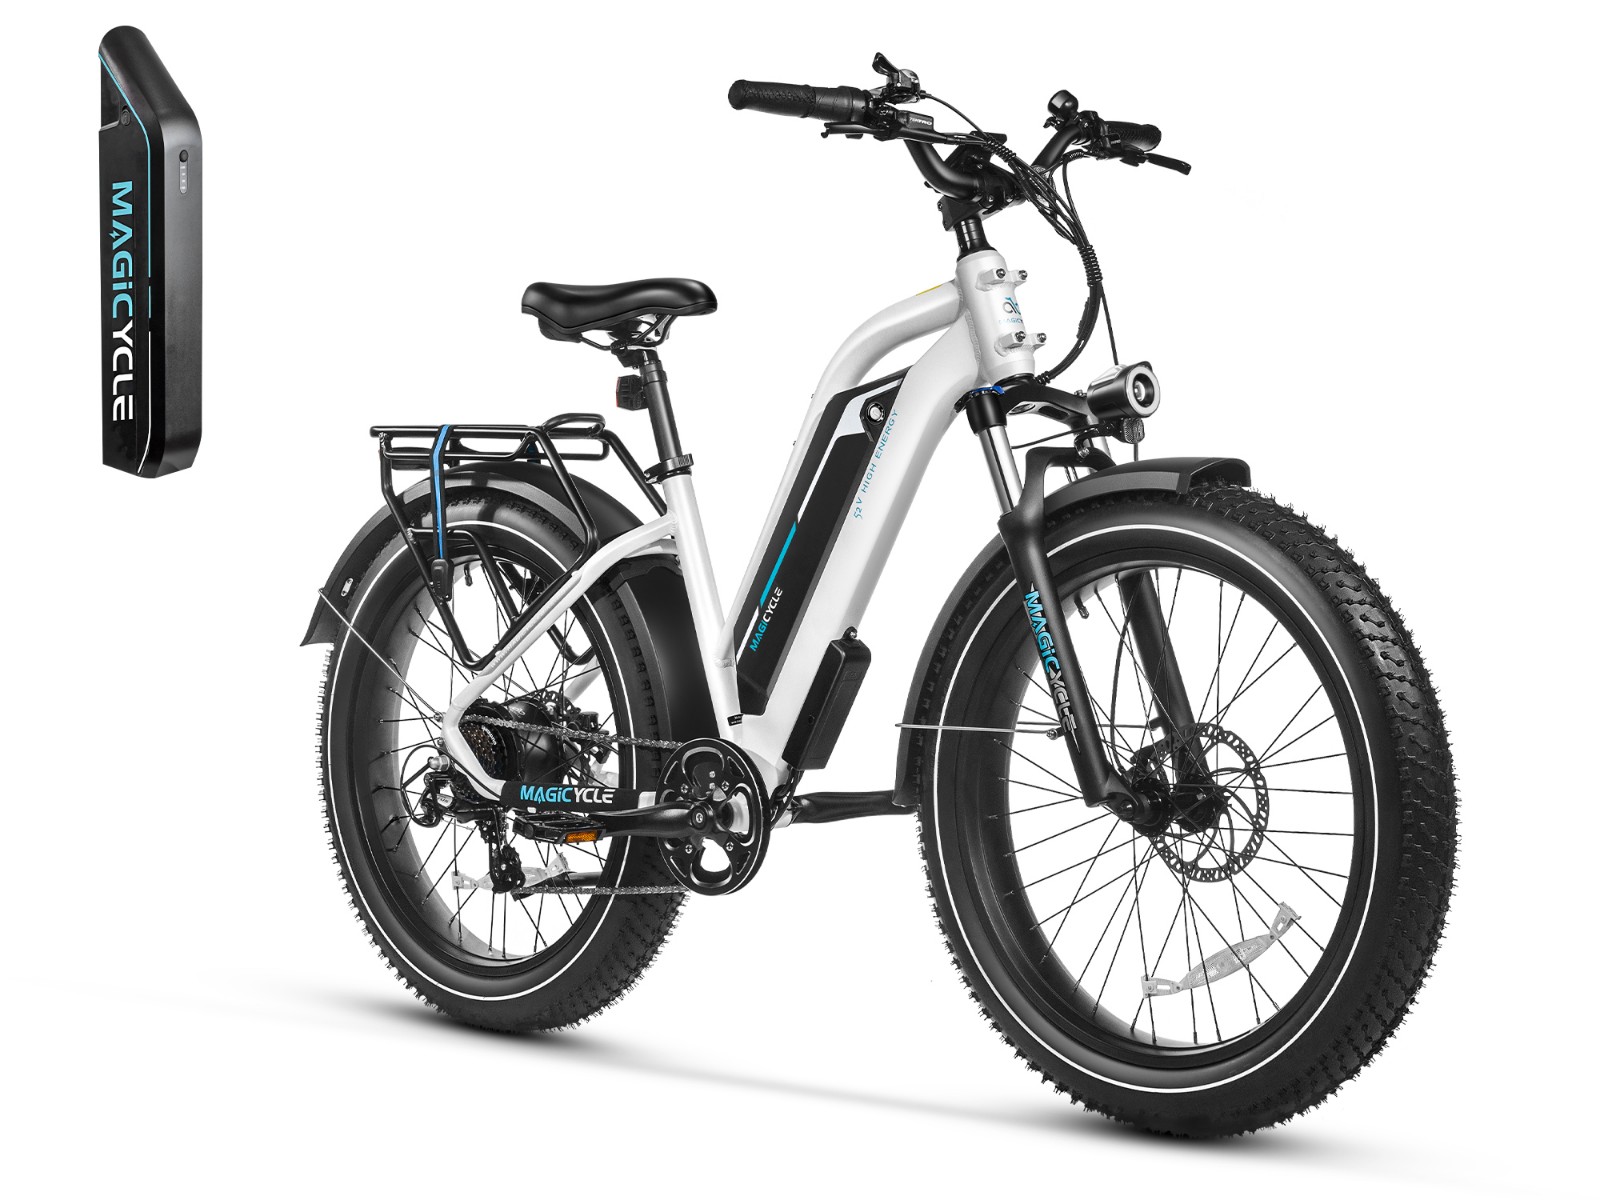 Combo Sale - Magicycle Cruiser Step-thru 52V 15Ah Ebike with Second 52V 15Ah Battery - Canada Only